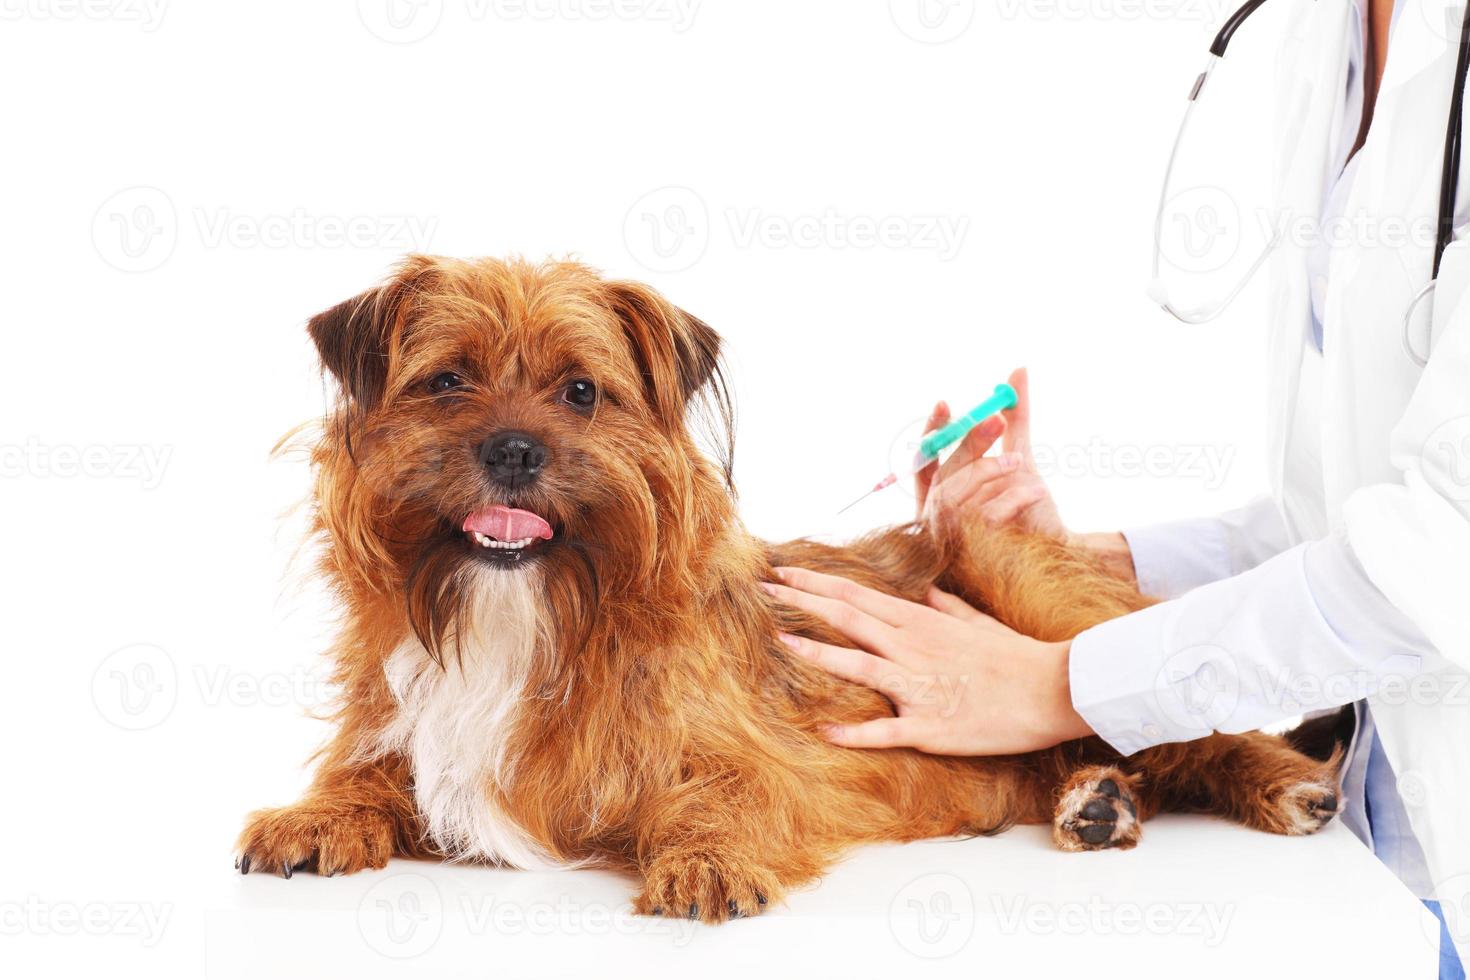 Vet dog and injection photo